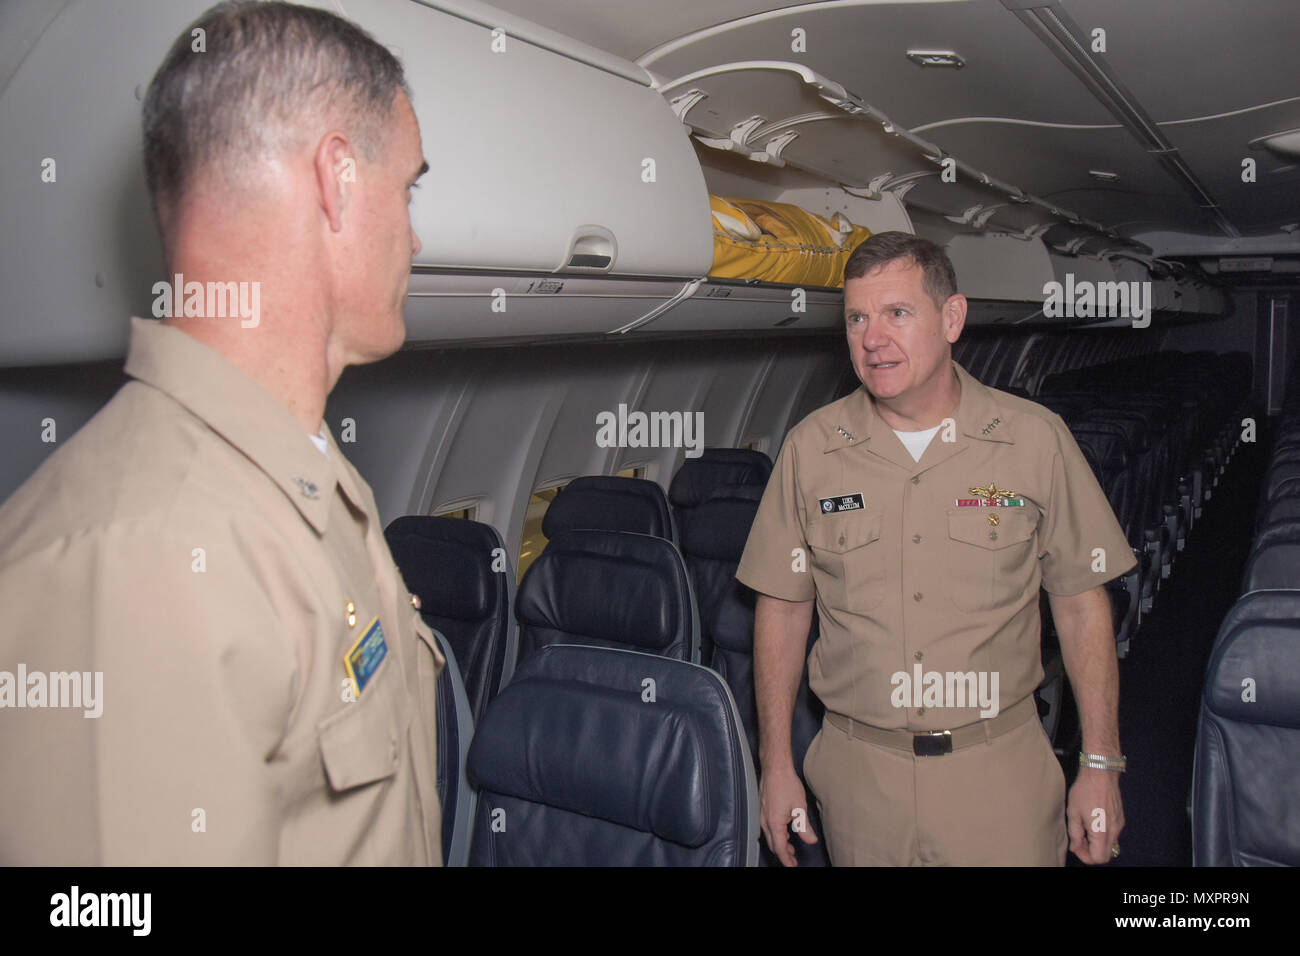 161201-N-XB816-042 FORT WORTH, Texas (Dec. 1, 2016) Vice Adm. Luke McCollum, chief of Navy Reserve/commander, Navy Reserve Force, tours of a C-40A 'Clipper' with Capt. Scott Eargle, commodore, Fleet Logistics Support Wing, and talks about various operations conducted by Fleet Logistics Support Squadron (VR) 59 at Naval Air Station Fort Worth Joint Reserve Base.  McCollum, formerly deputy commander of the Navy Expeditionary Combat Command, became the 14th chief of Navy Reserve/commander, Navy Reserve Force Sept. 2016. (U.S. Navy photo by Petty Officer 2nd Class Jason Howard/Released) Stock Photo